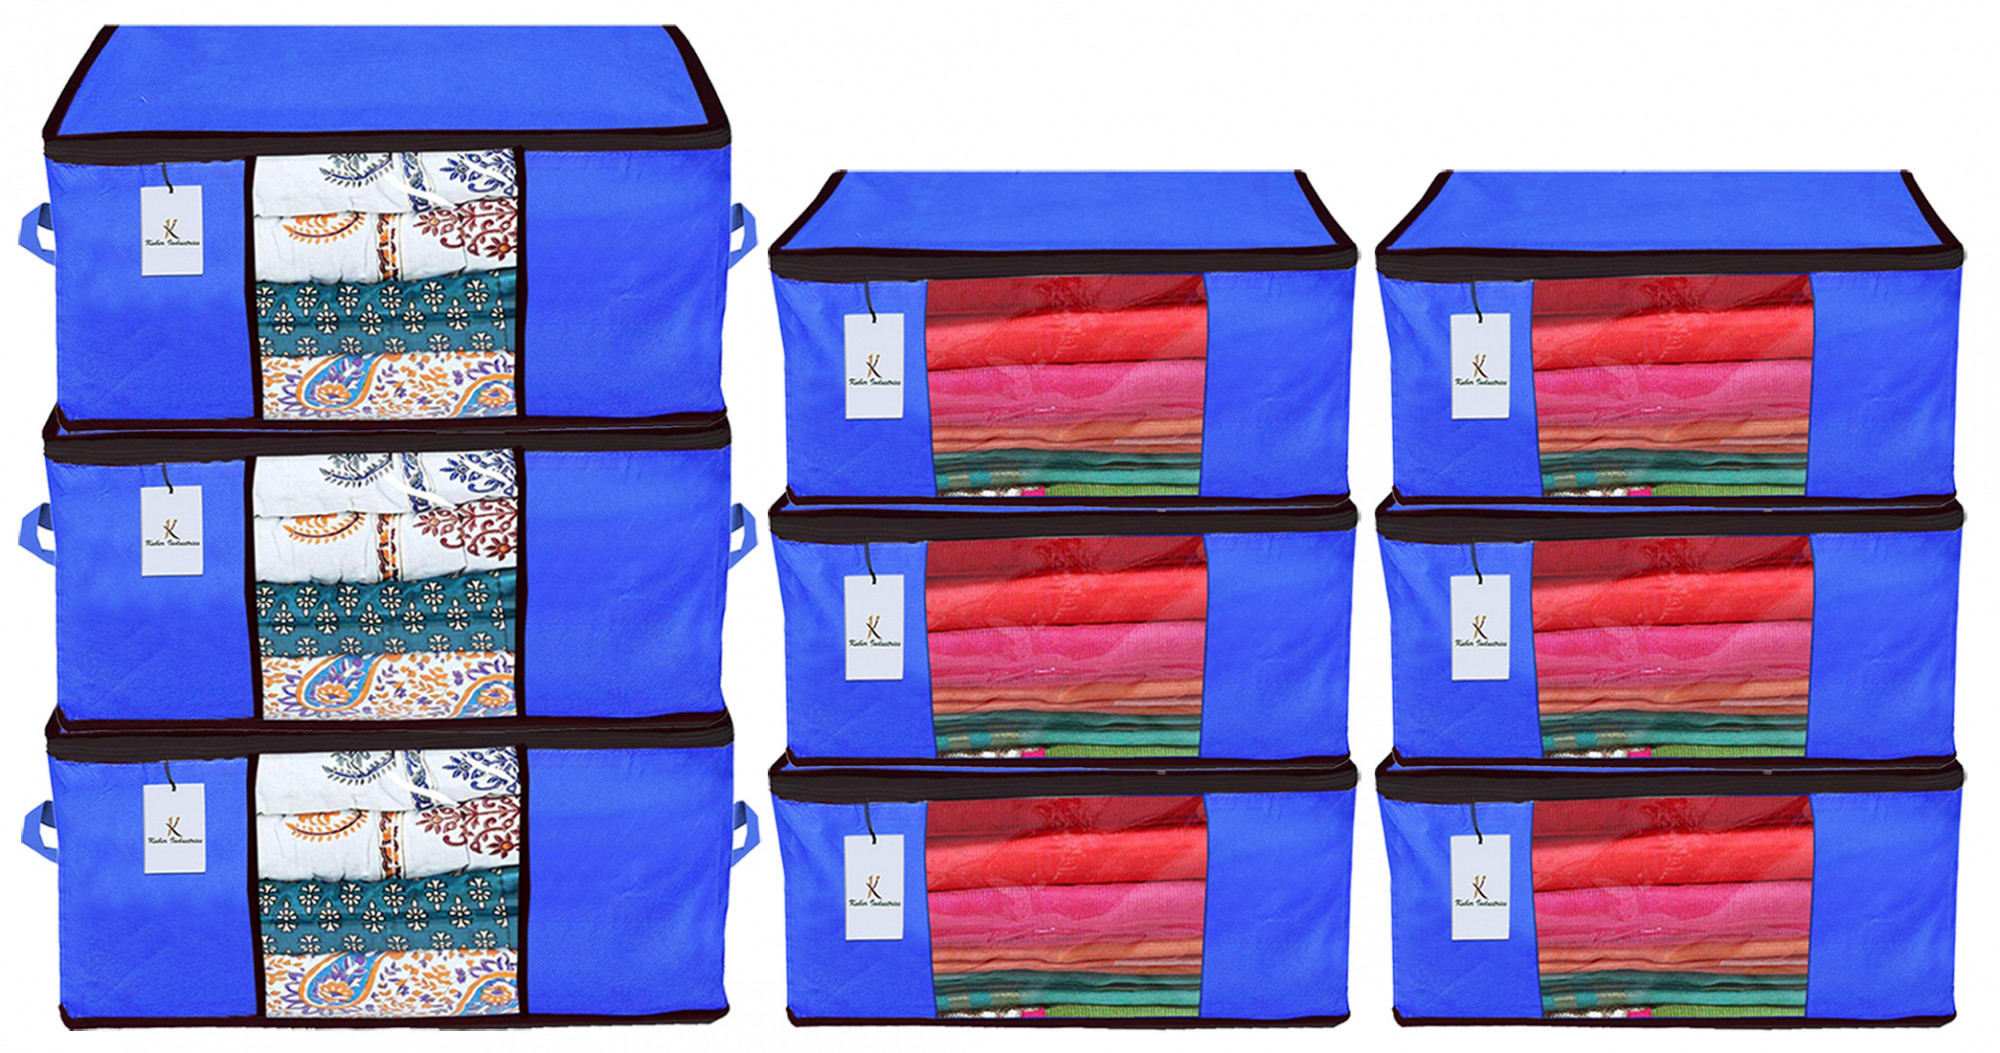 Kuber Industries Non Woven Saree Cover And Underbed Storage Bag, Cloth Organizer For Storage, Blanket Cover Combo Set (Royal Blue) -CTKTC38487